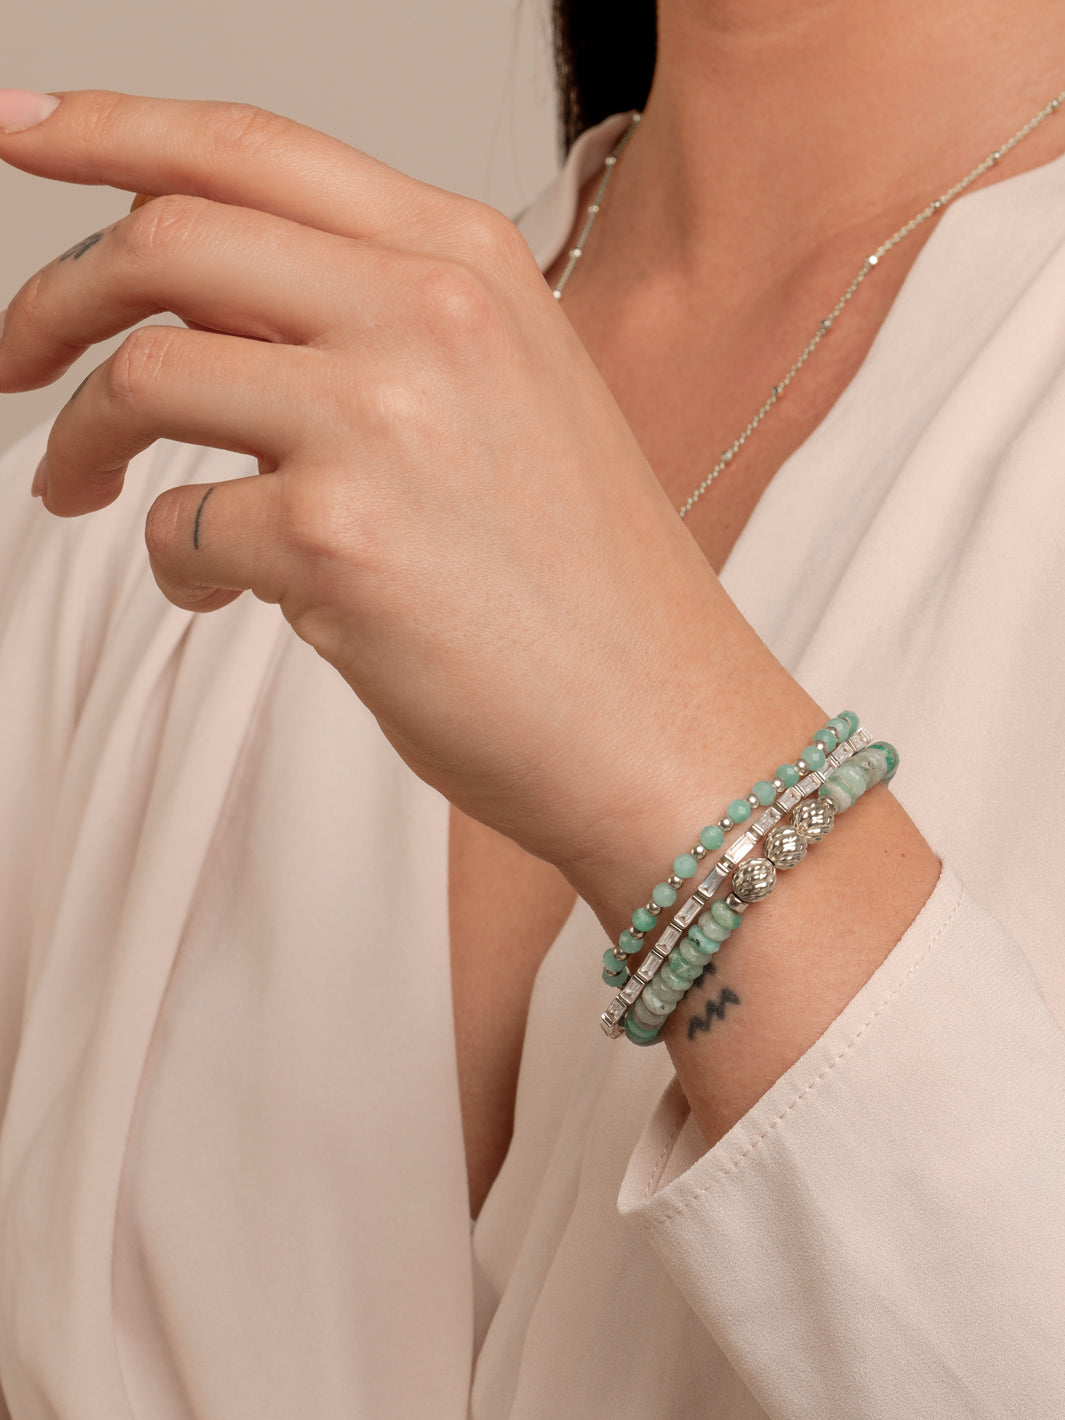 Rich Green Amazonit Tennis Baguette Armbänder Stack | Silber